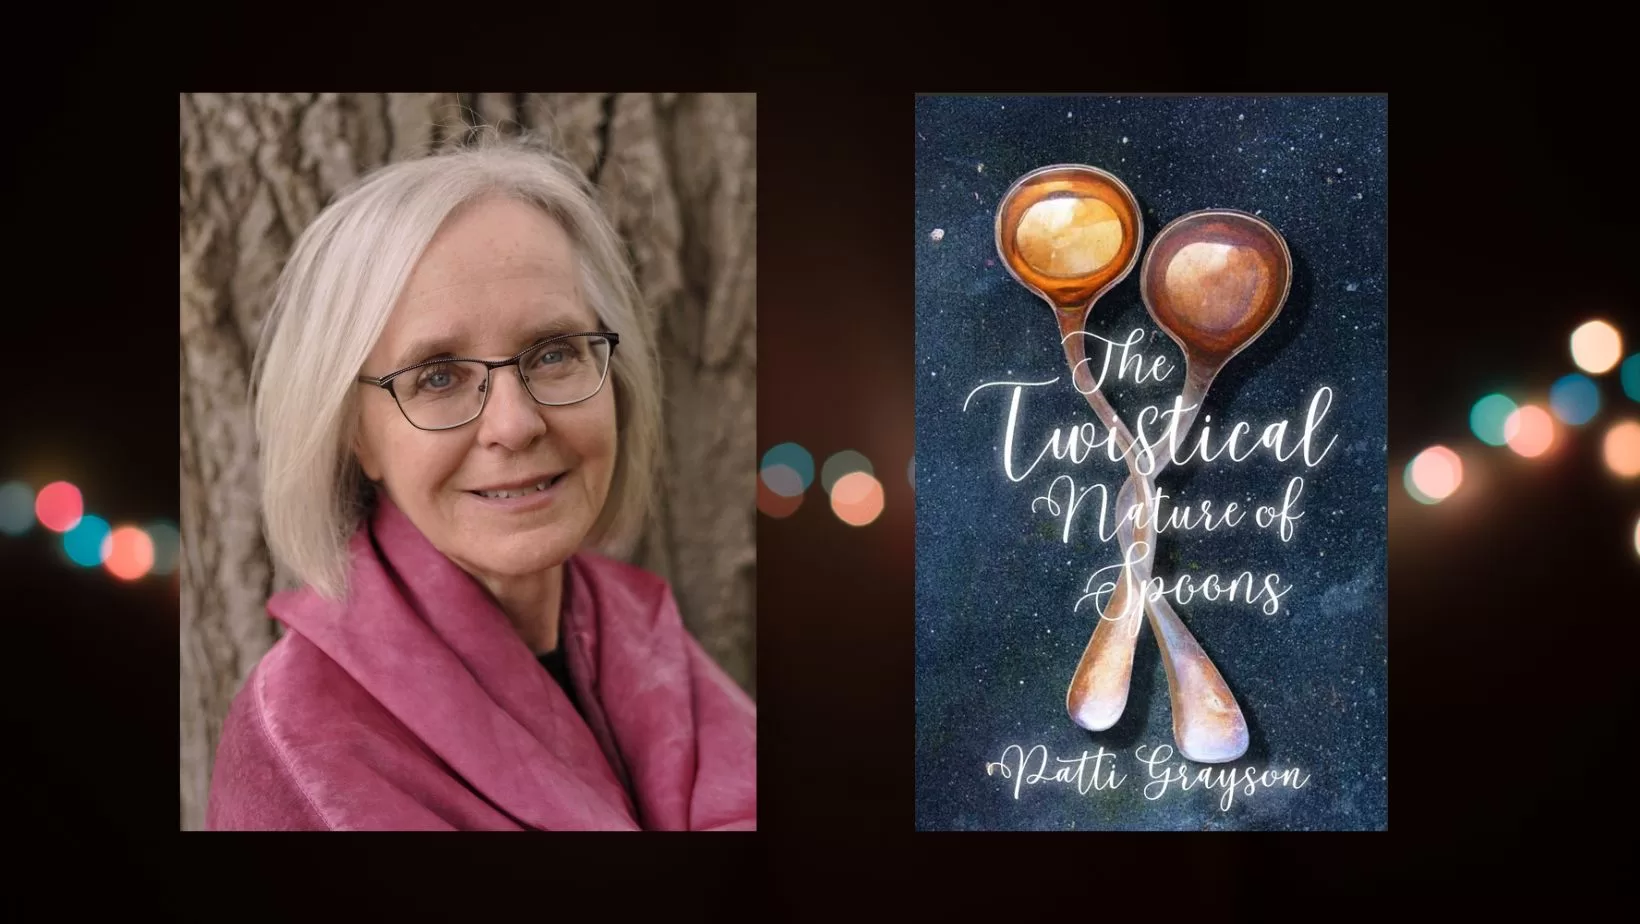 Patti Grayson author of the Twistical Nature of Spoons